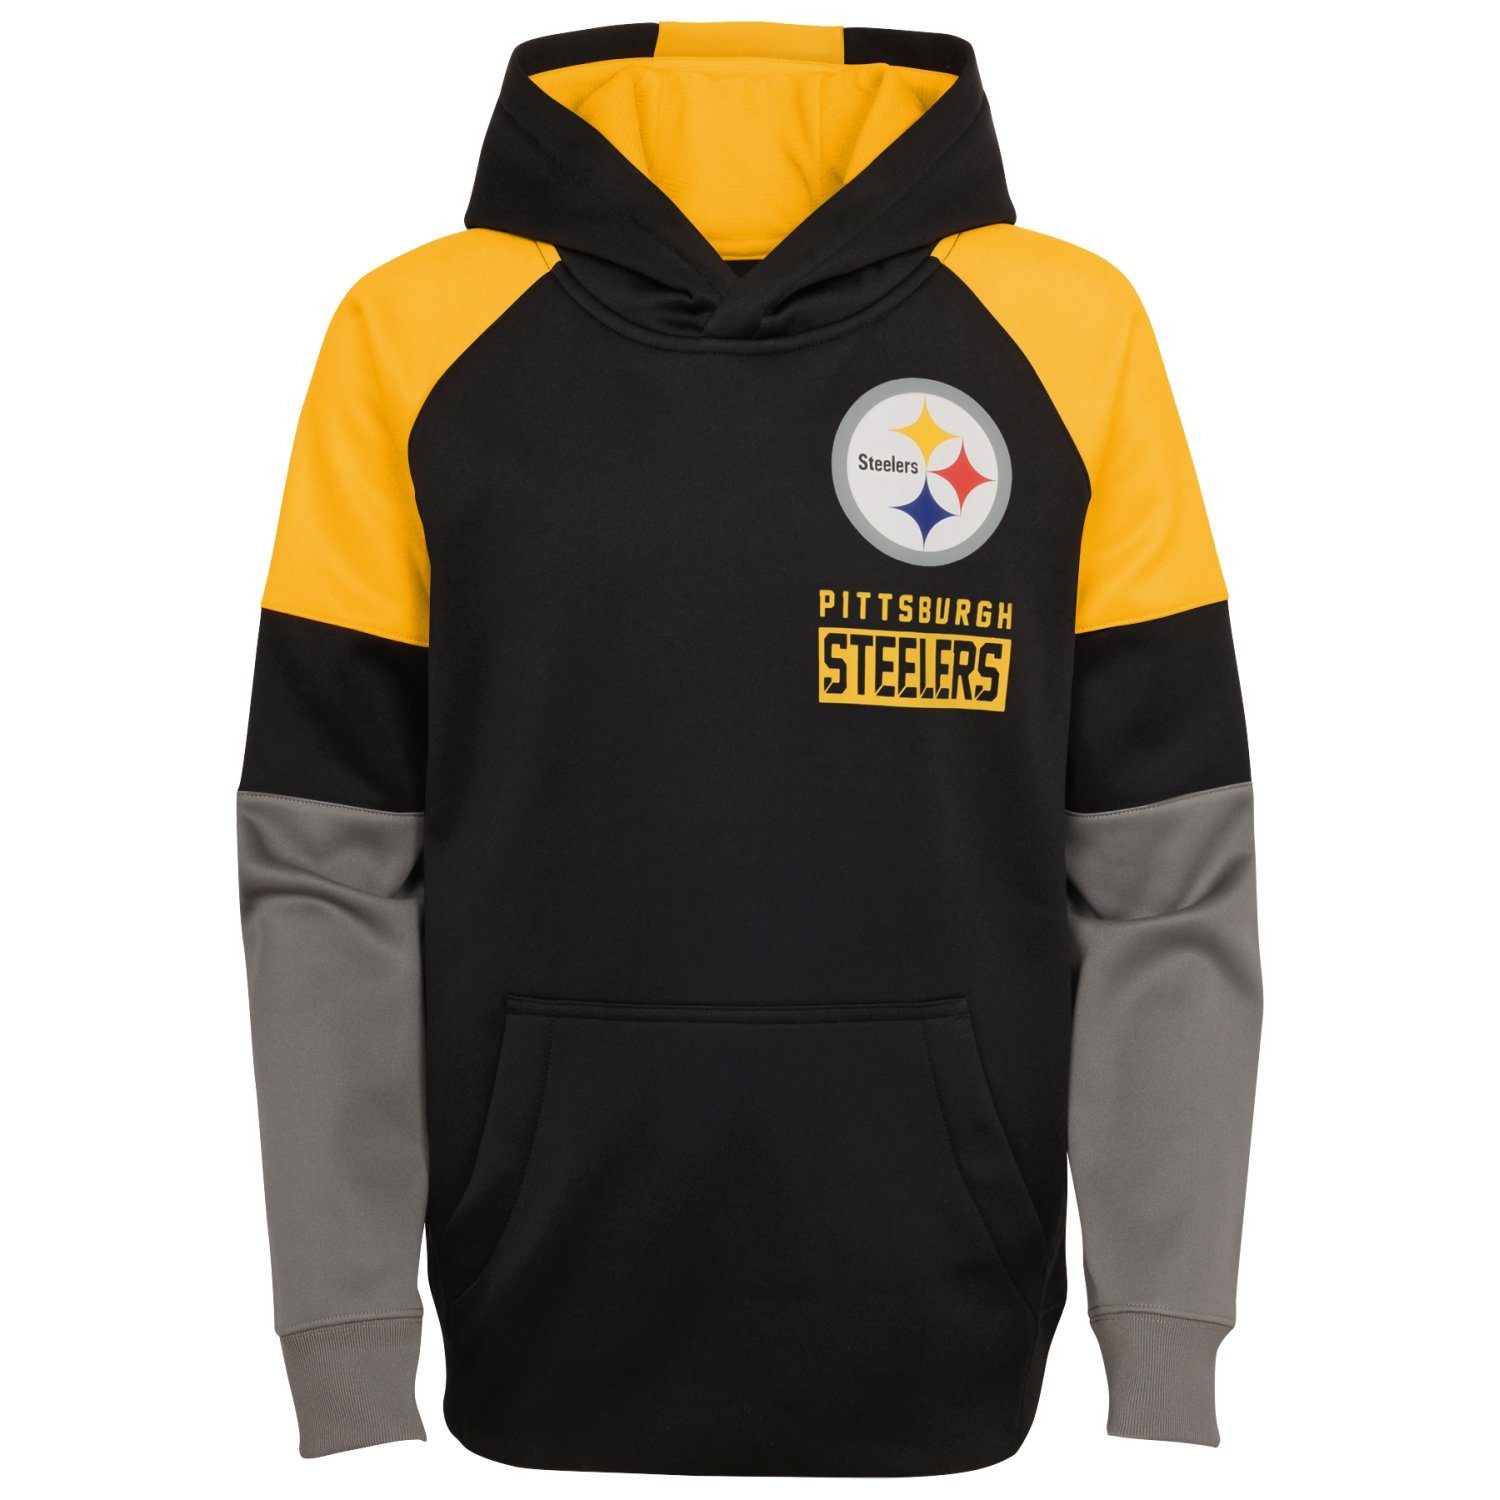 Outerstuff Kapuzenpullover PLAY Pittsburgh Performance NFL Steelers